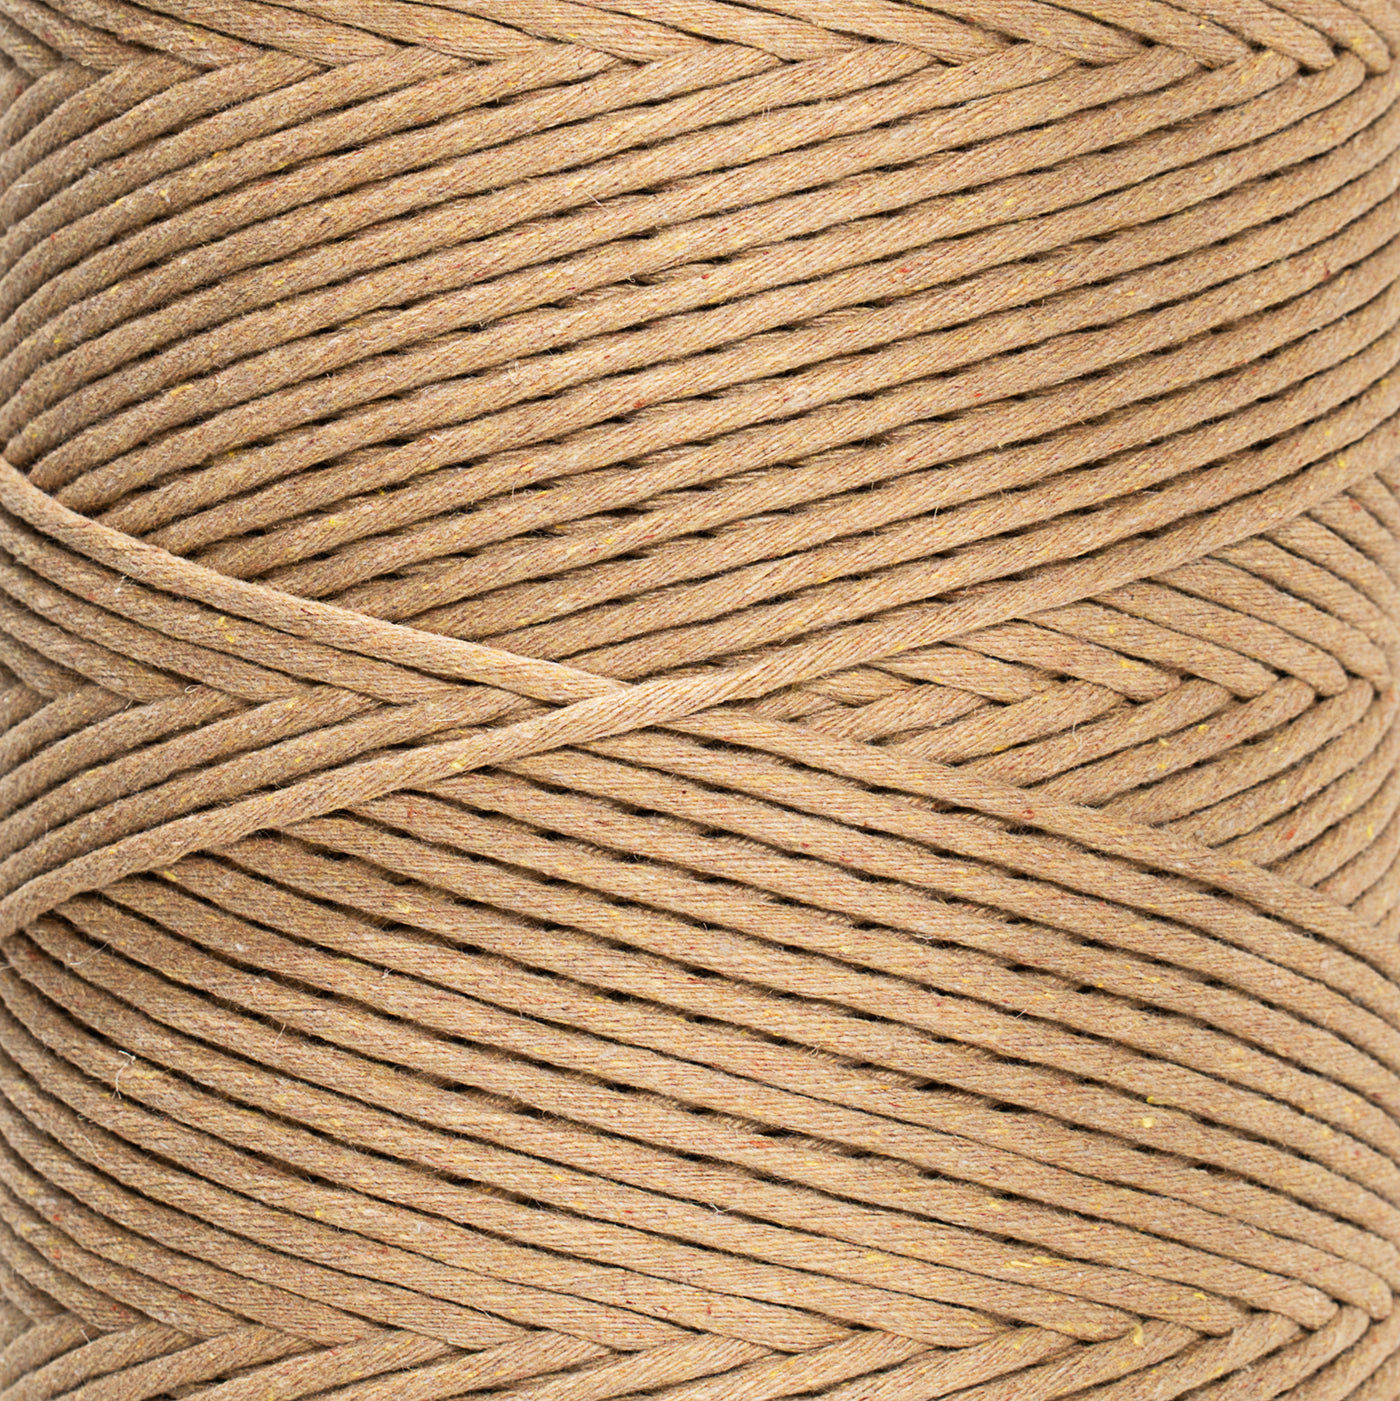 MACRAME SOFT COTTON CORD RECYCLED 4 MM - 1 SINGLE STRAND - TOAST COLOR ...